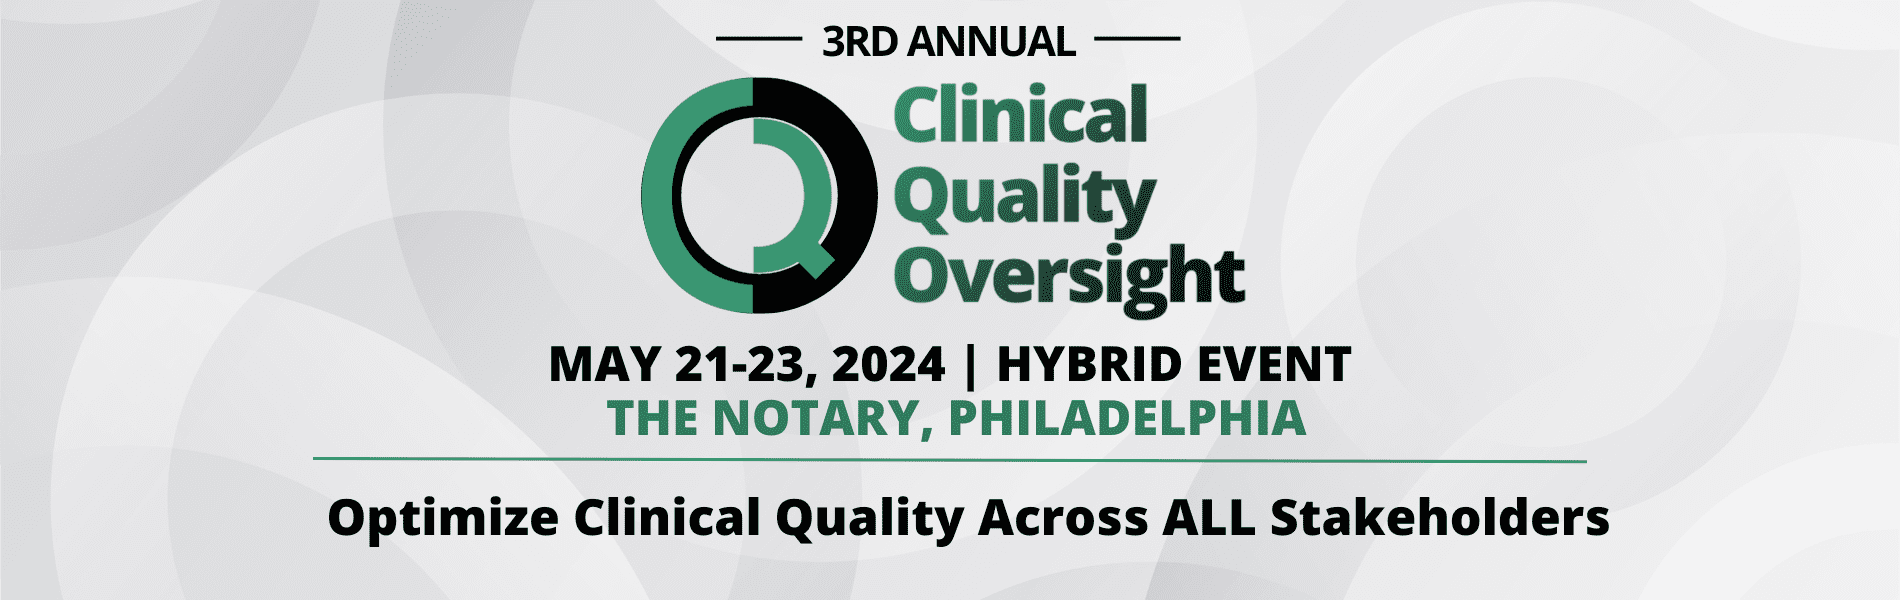 Hero of 3rd Annual Clinical Quality Oversight, May 21-23, 2024 | Hybrid Event, The Notary, Philadelphia